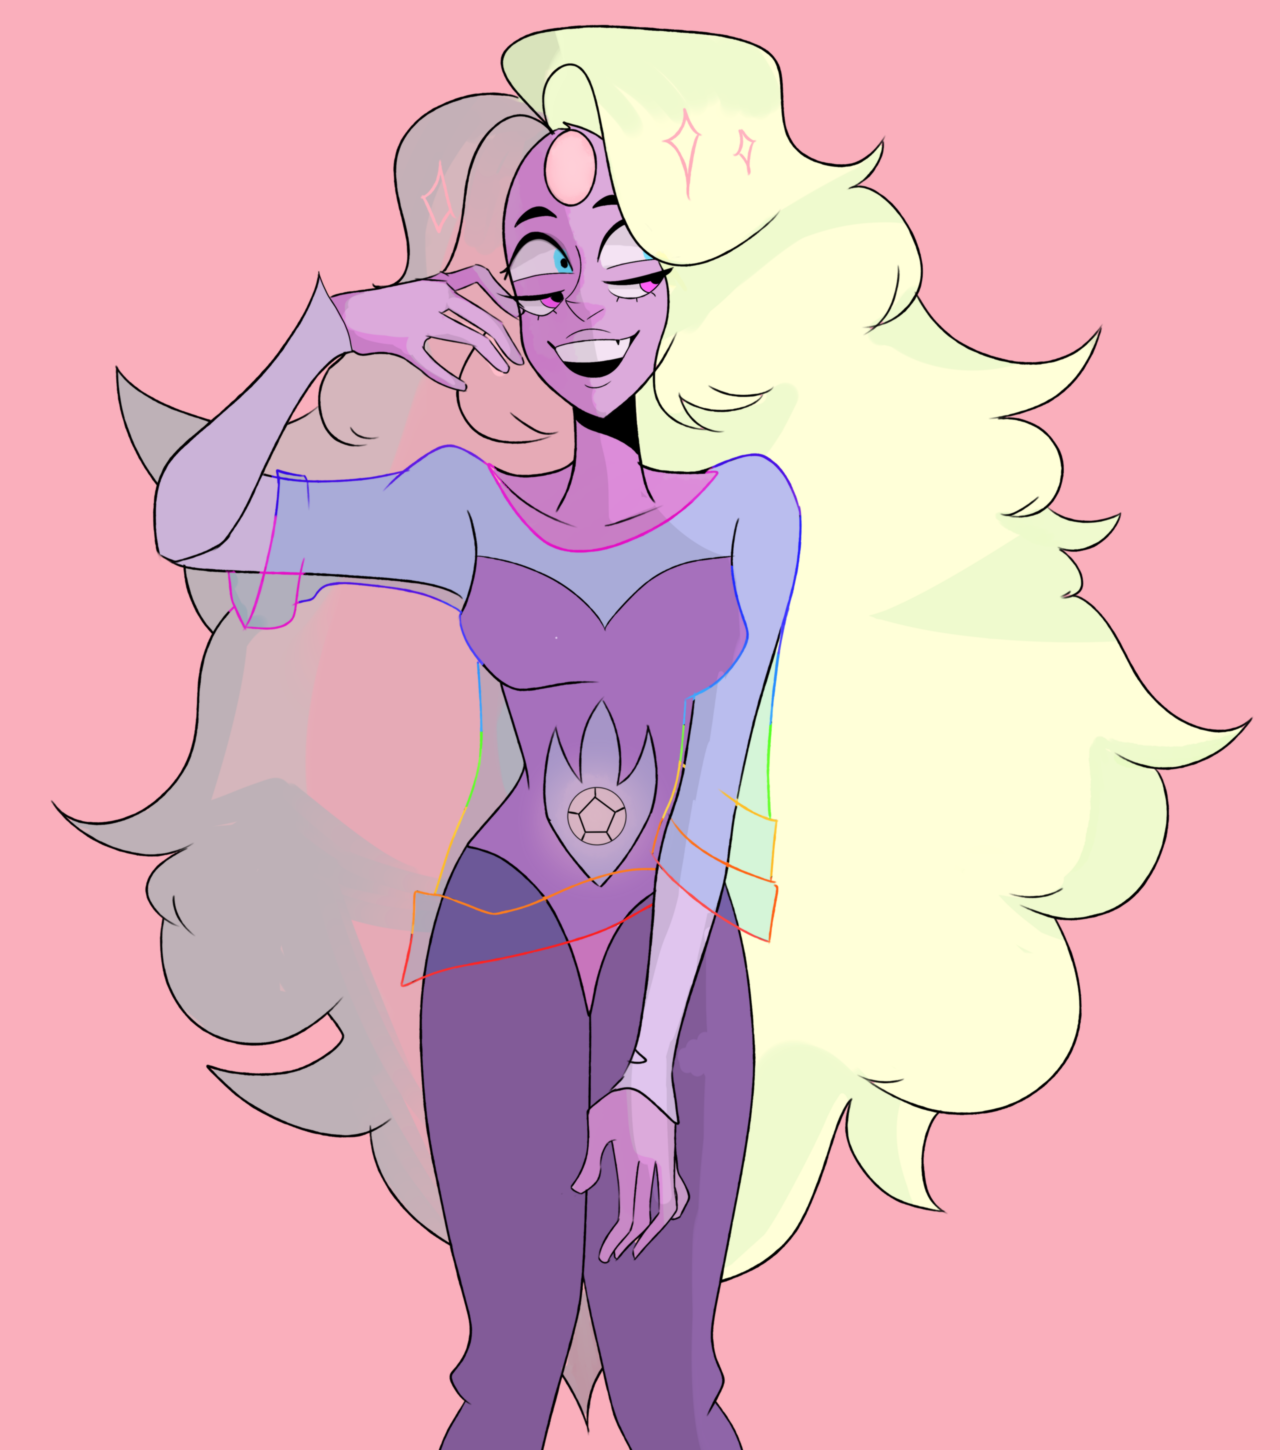 im in love with rainbow quartz and her design is my favourite. no one can convince me otherwise